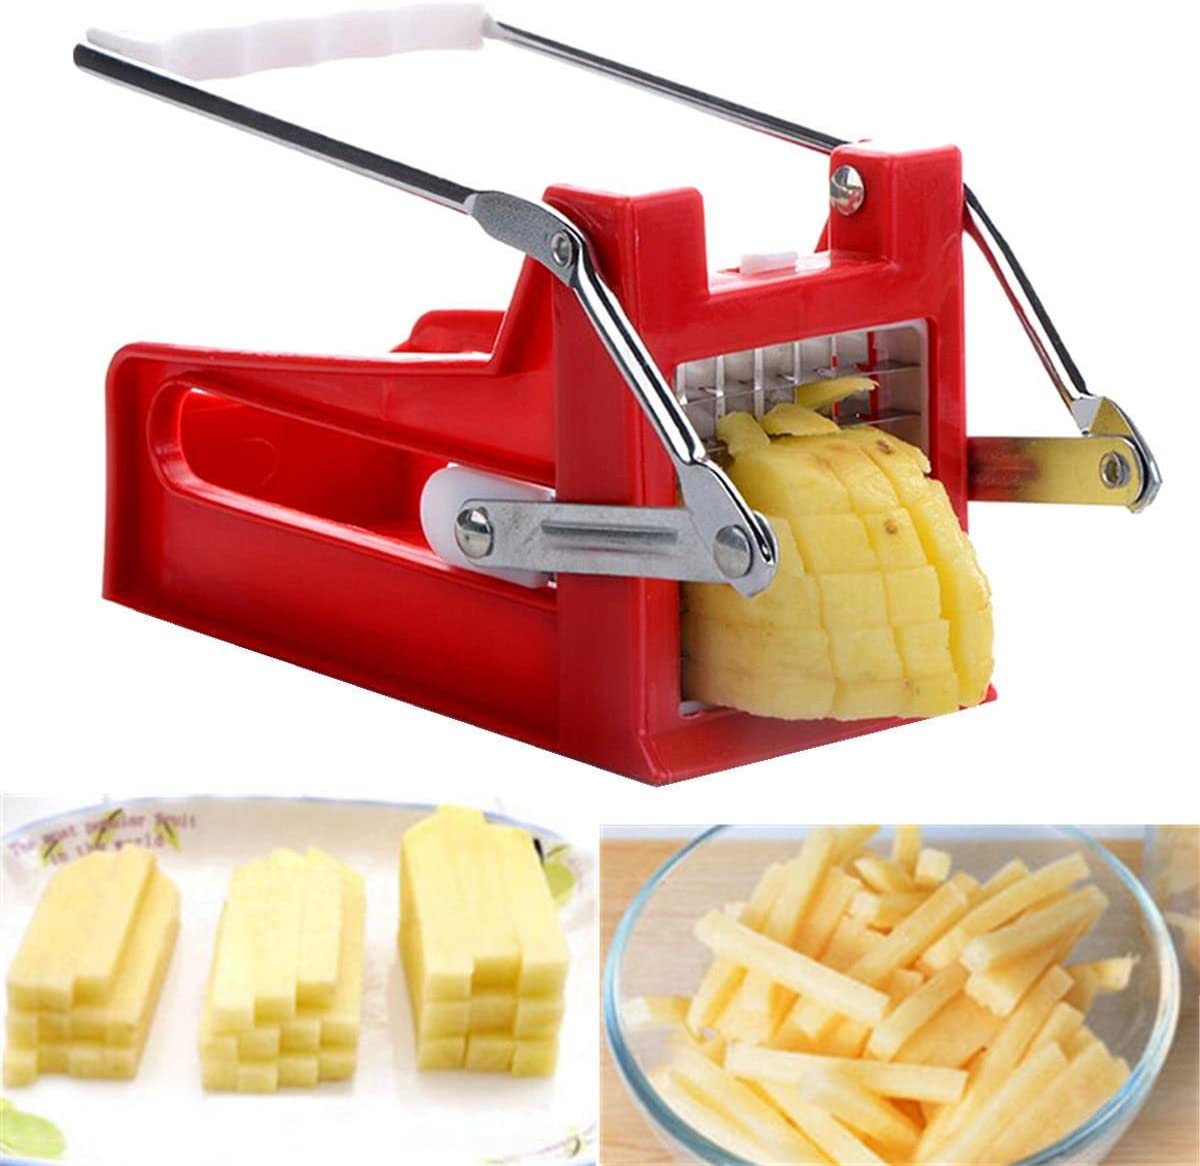 French Fires Chips Potato Chip Cutter, Stainless Steel Slicer Vegetable Cutter Maker Slicer with 2 Blades